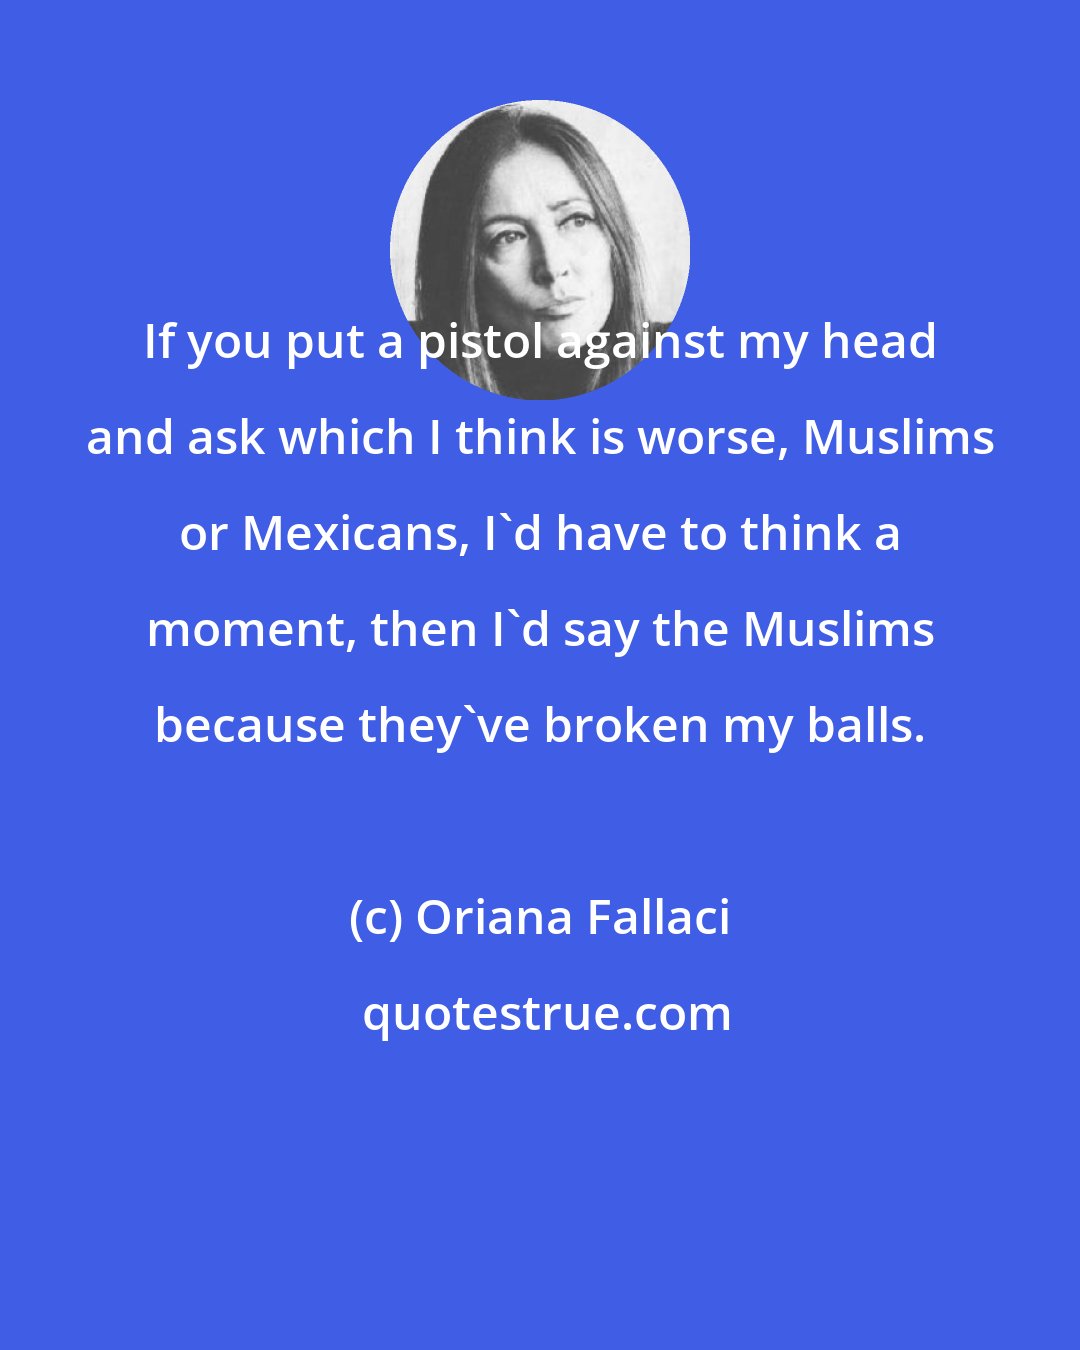 Oriana Fallaci: If you put a pistol against my head and ask which I think is worse, Muslims or Mexicans, I'd have to think a moment, then I'd say the Muslims because they've broken my balls.